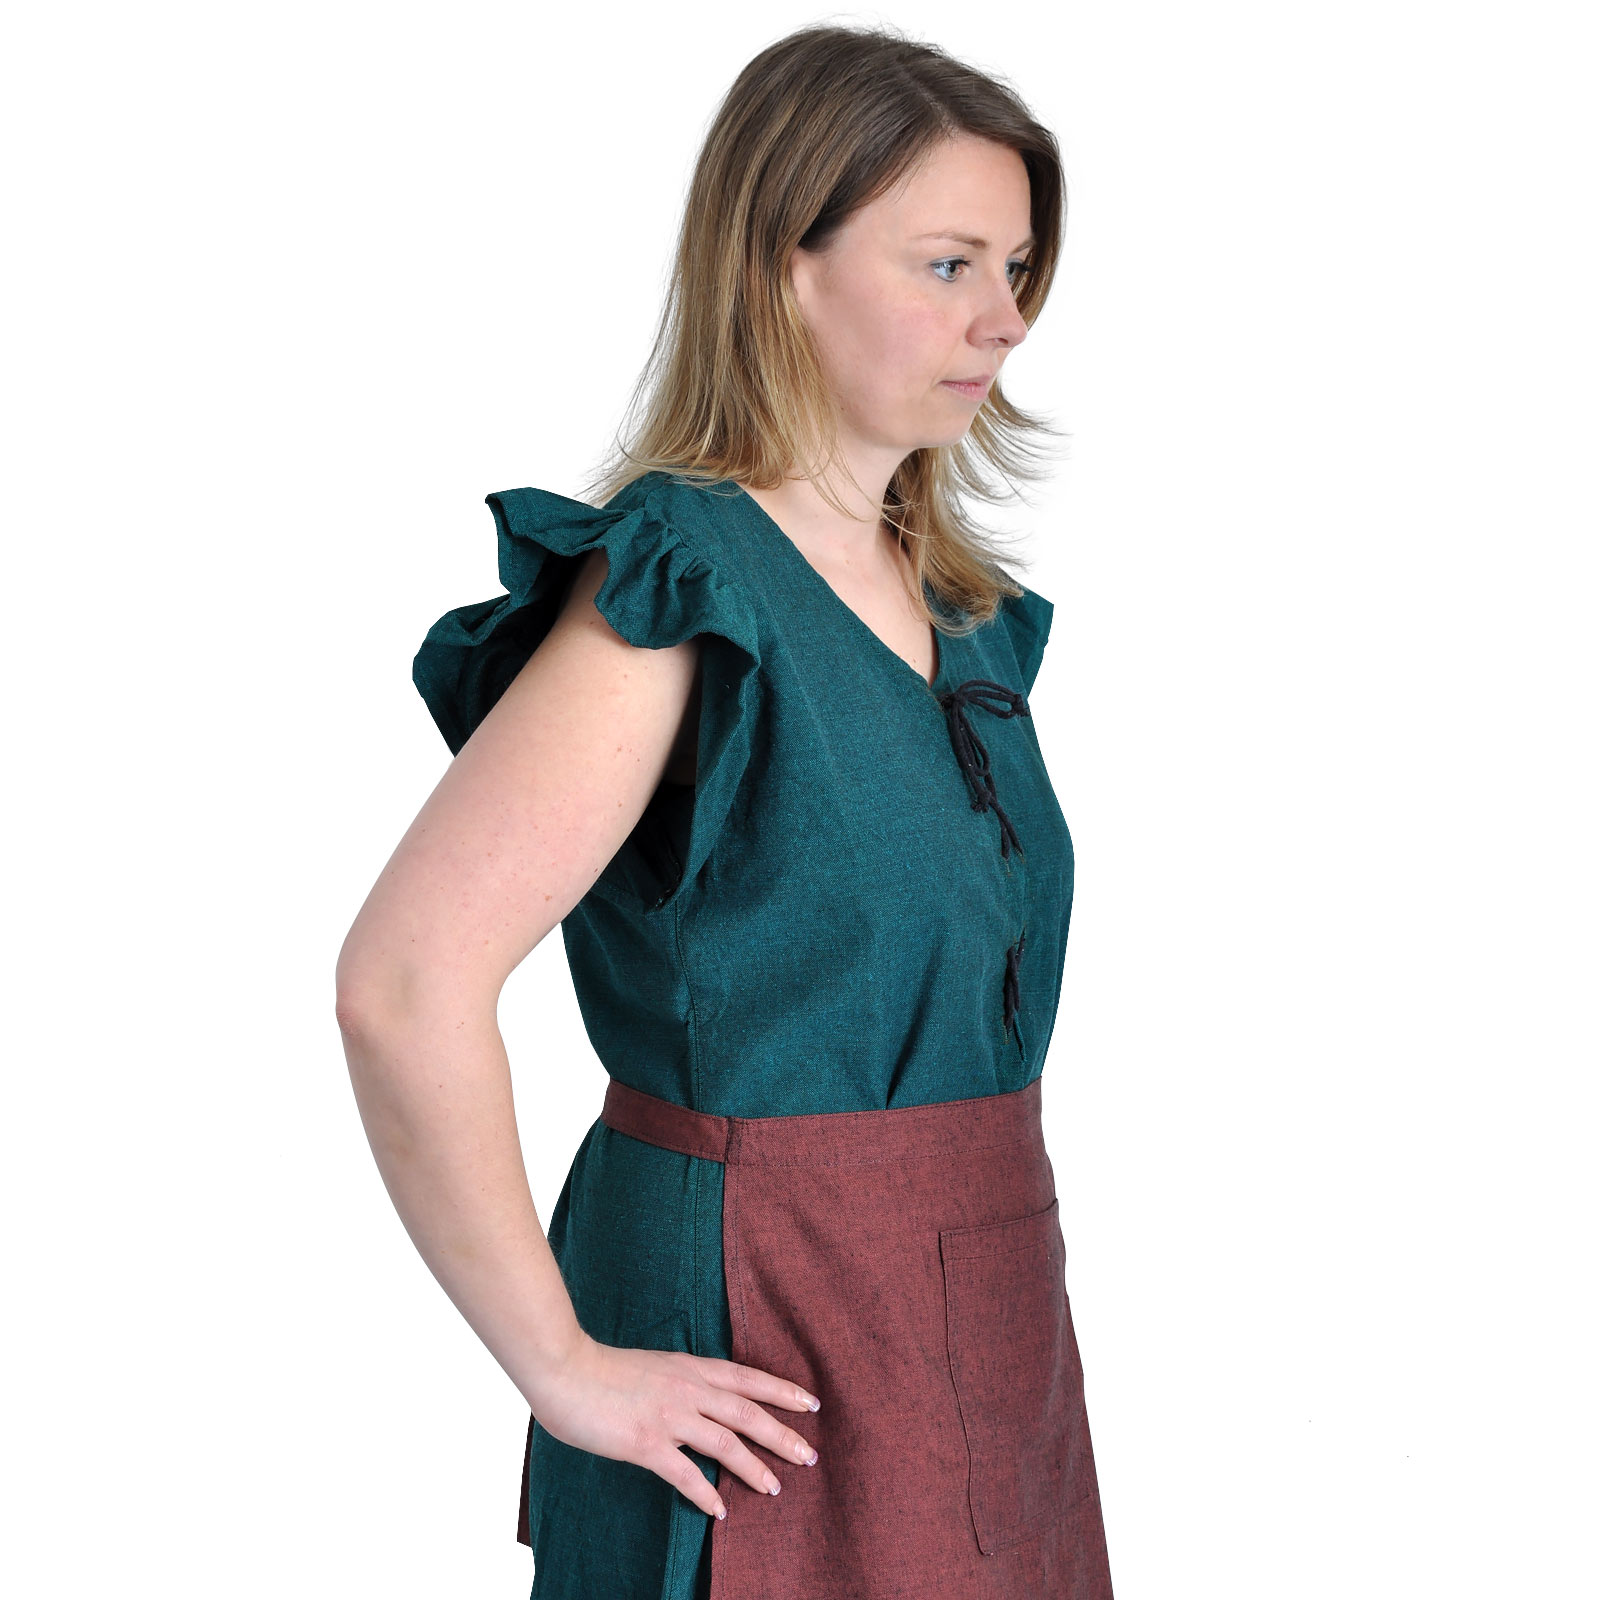 Medieval Dress Agga Short Sleeve with Apron Green